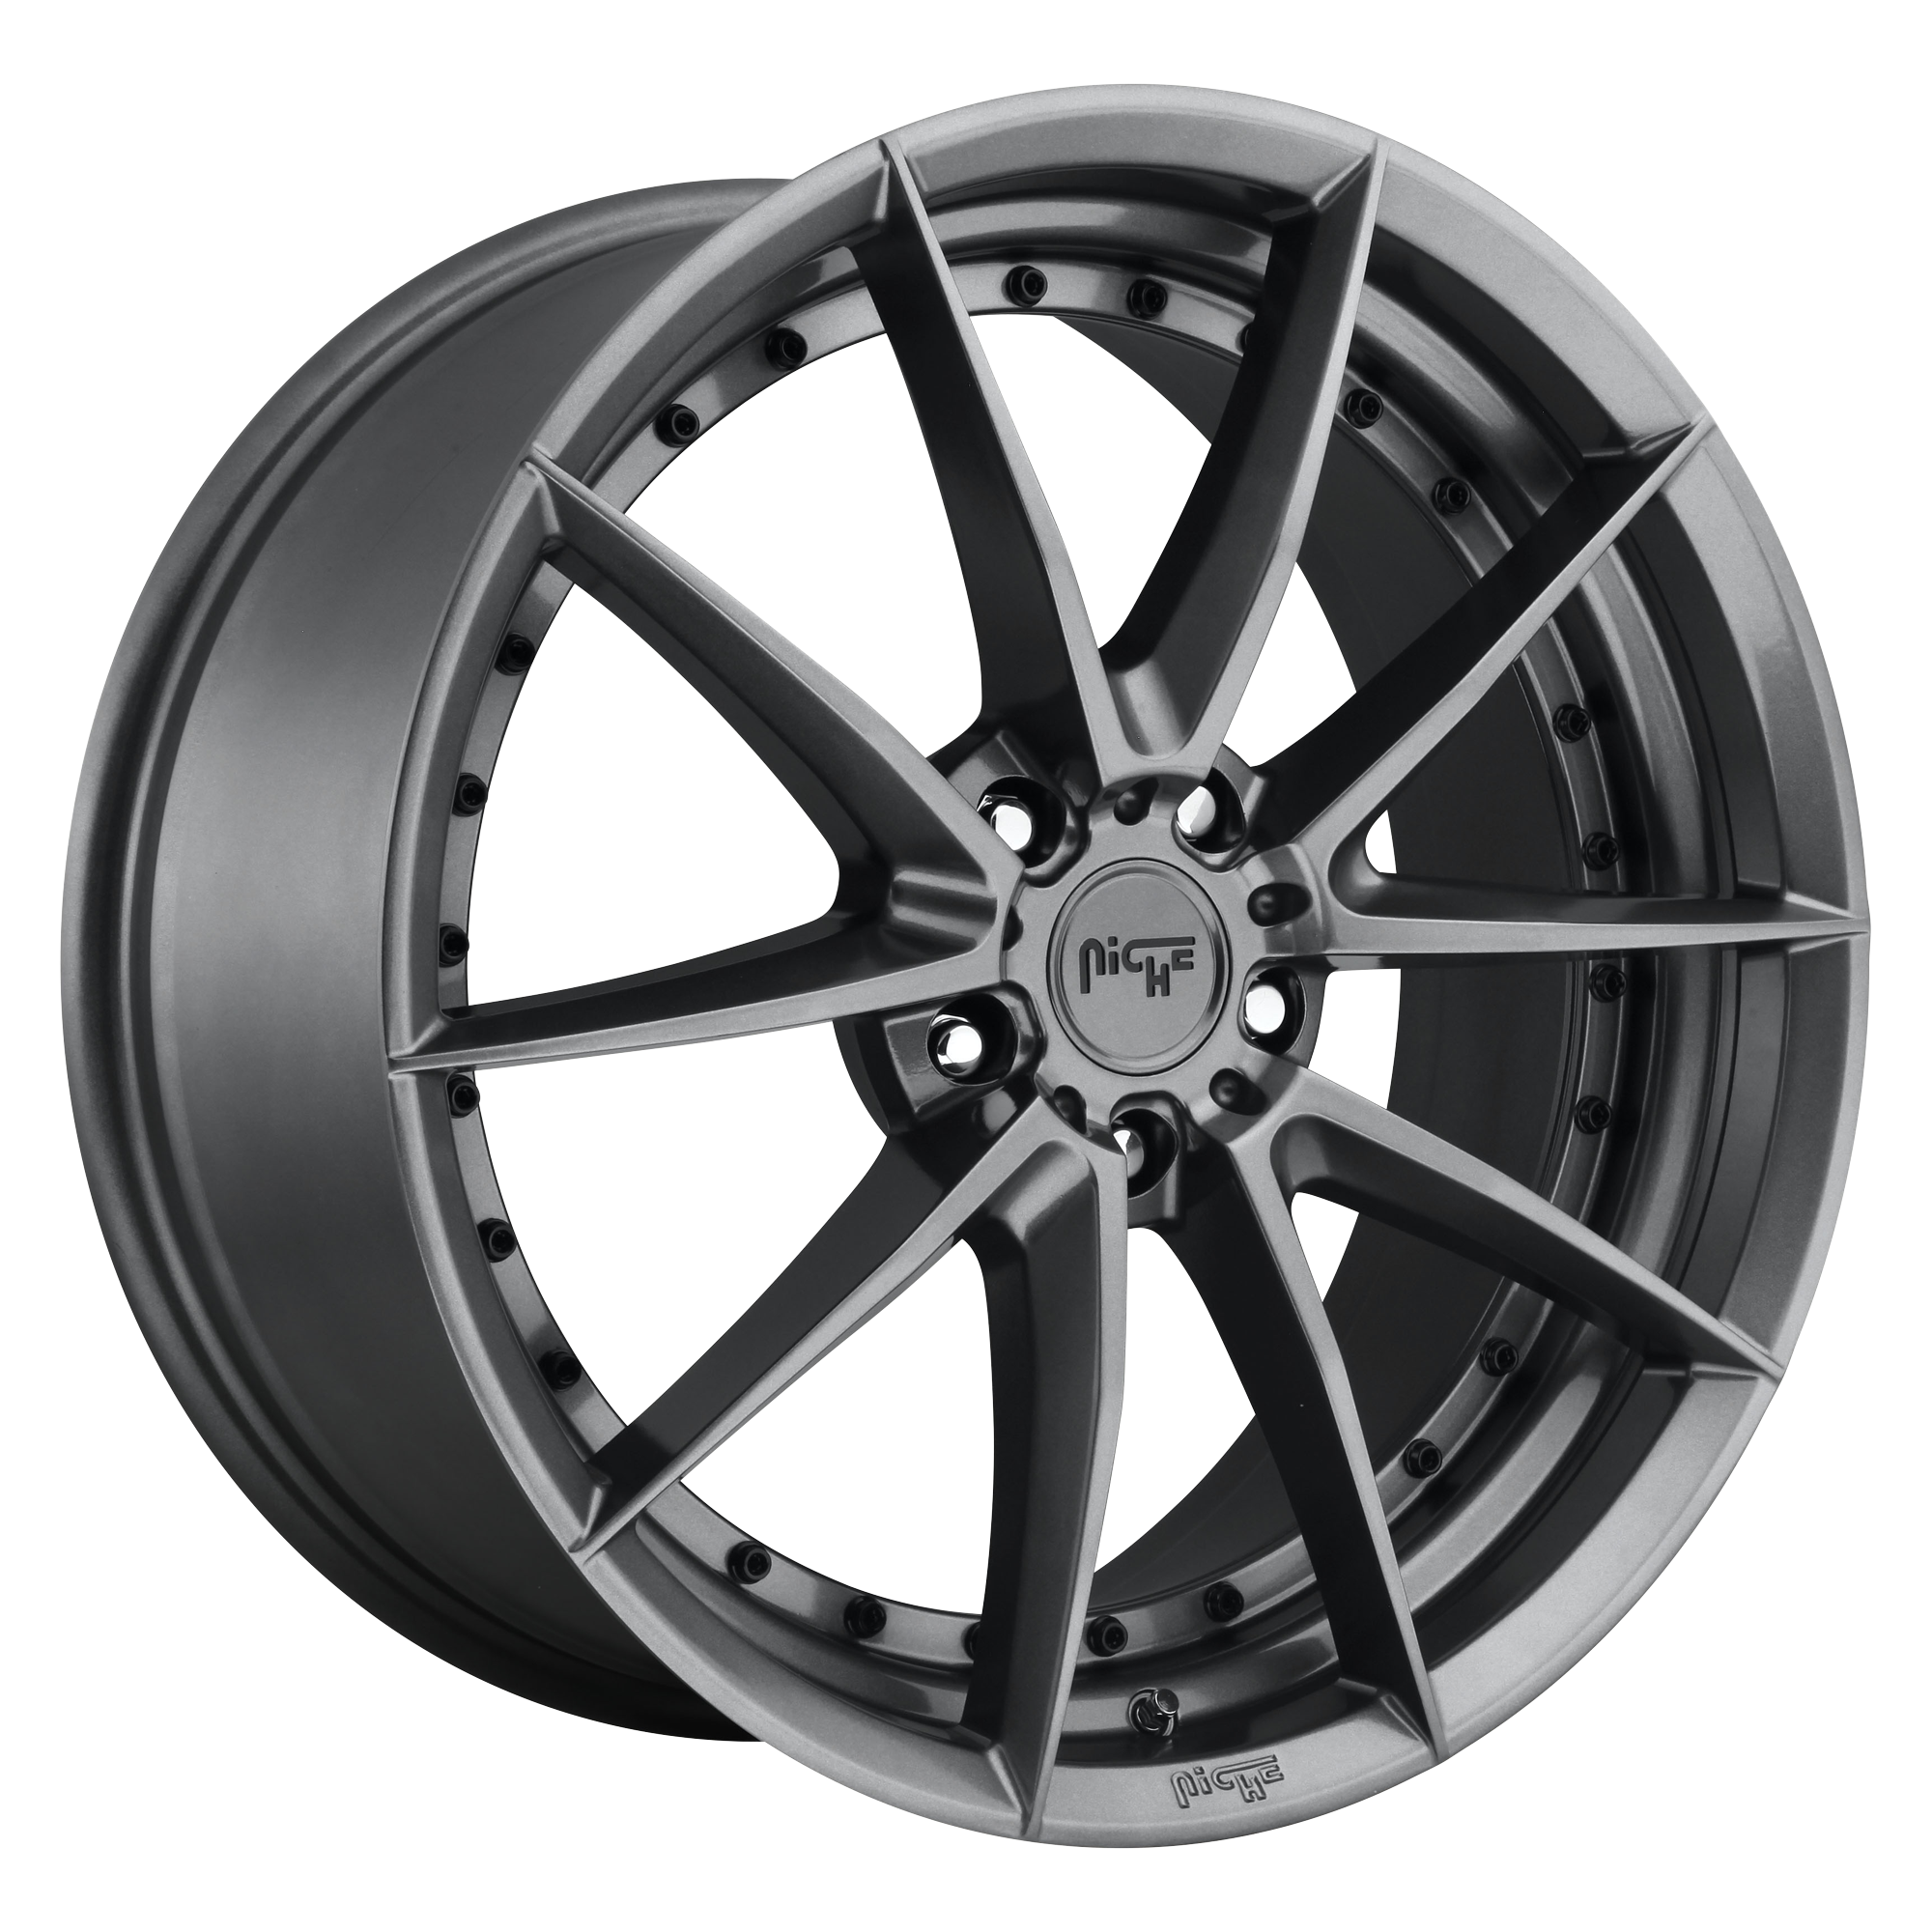 SECTOR 20x10.5 5x120.00 GLOSS ANTHRACITE (35 mm) - Tires and Engine Performance